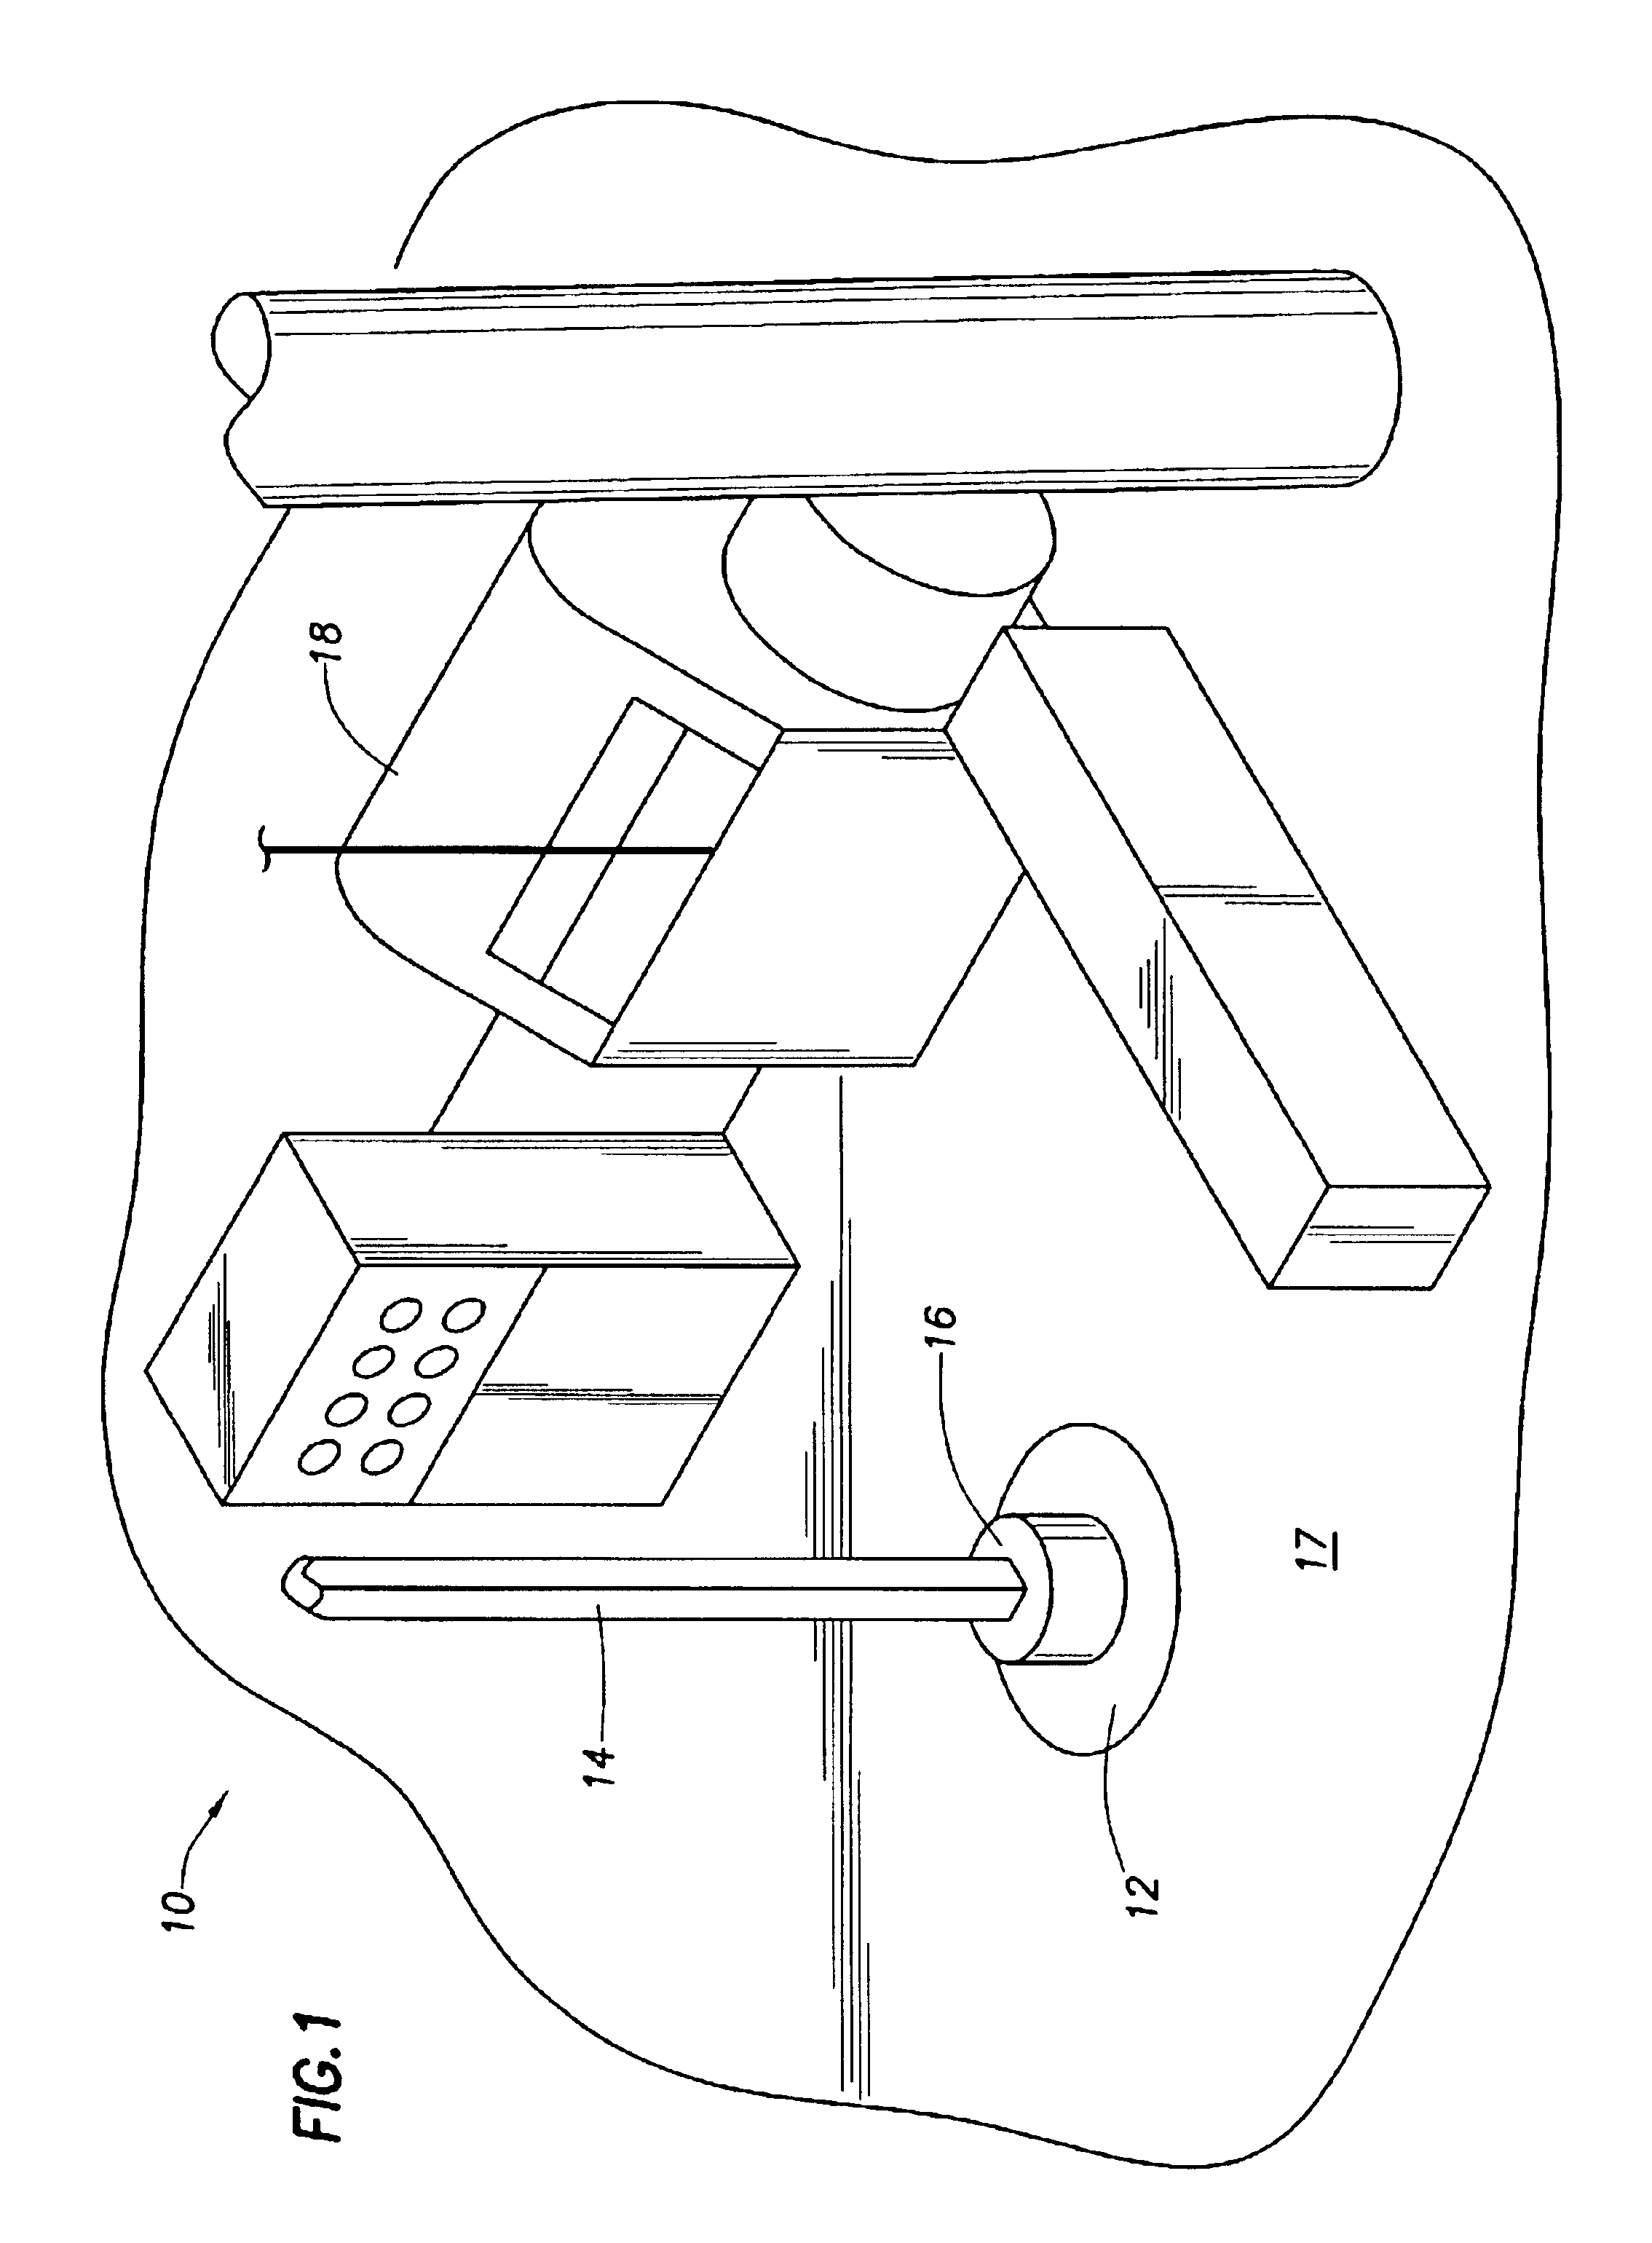 Lifting apparatus and method for oil field related services